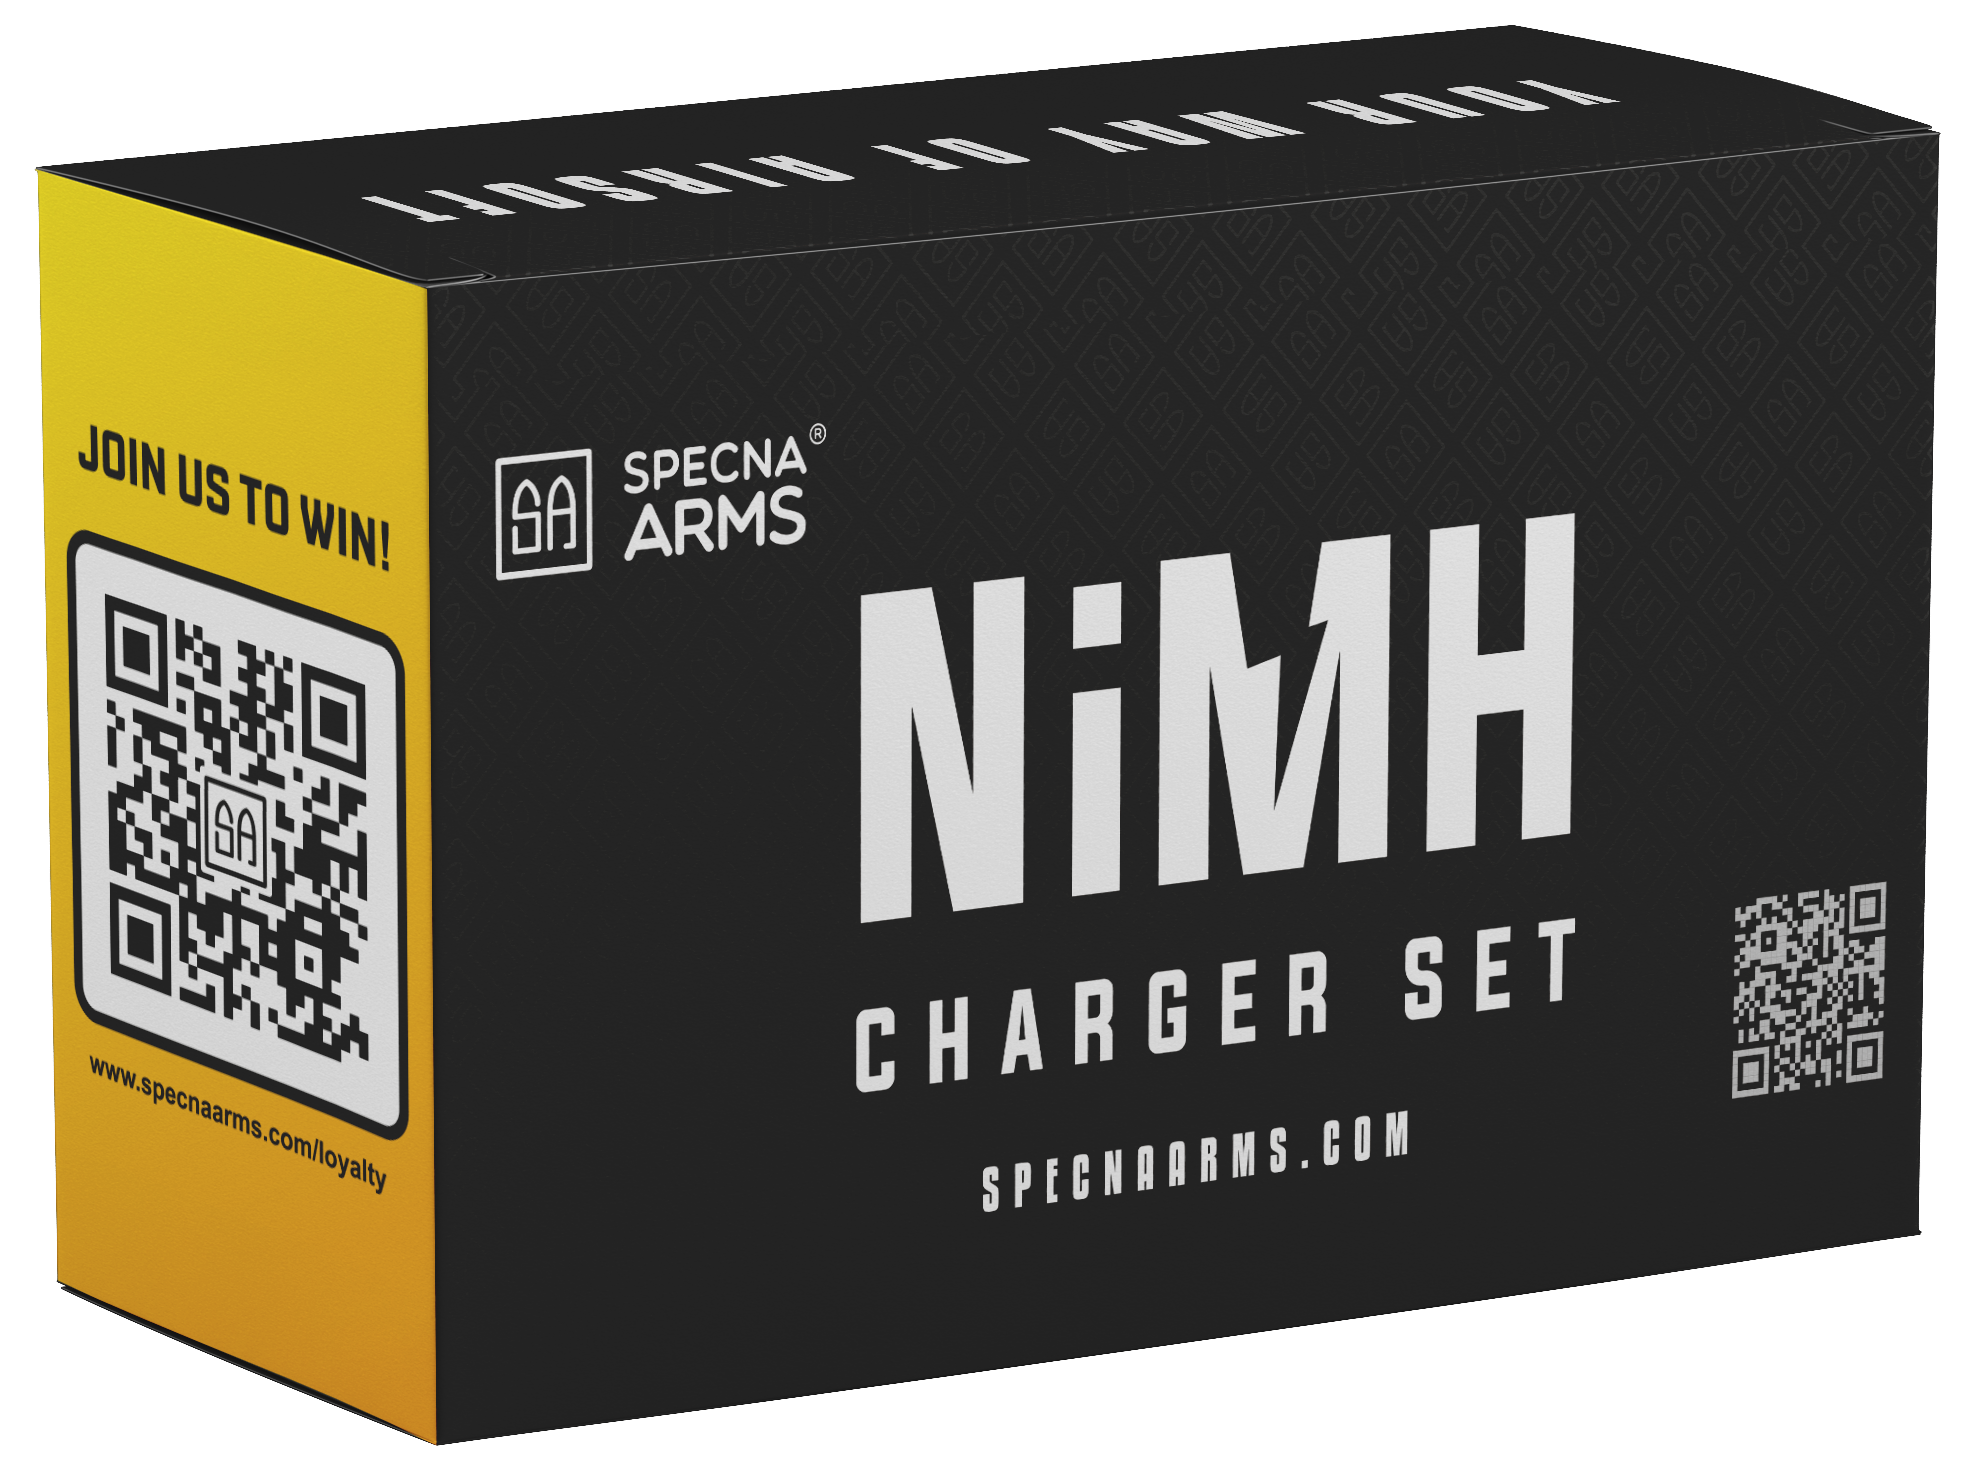 Specna Arms EASY Charger + NiMh 9.6 V 1600 mAh battery KIT - ssairsoft.com